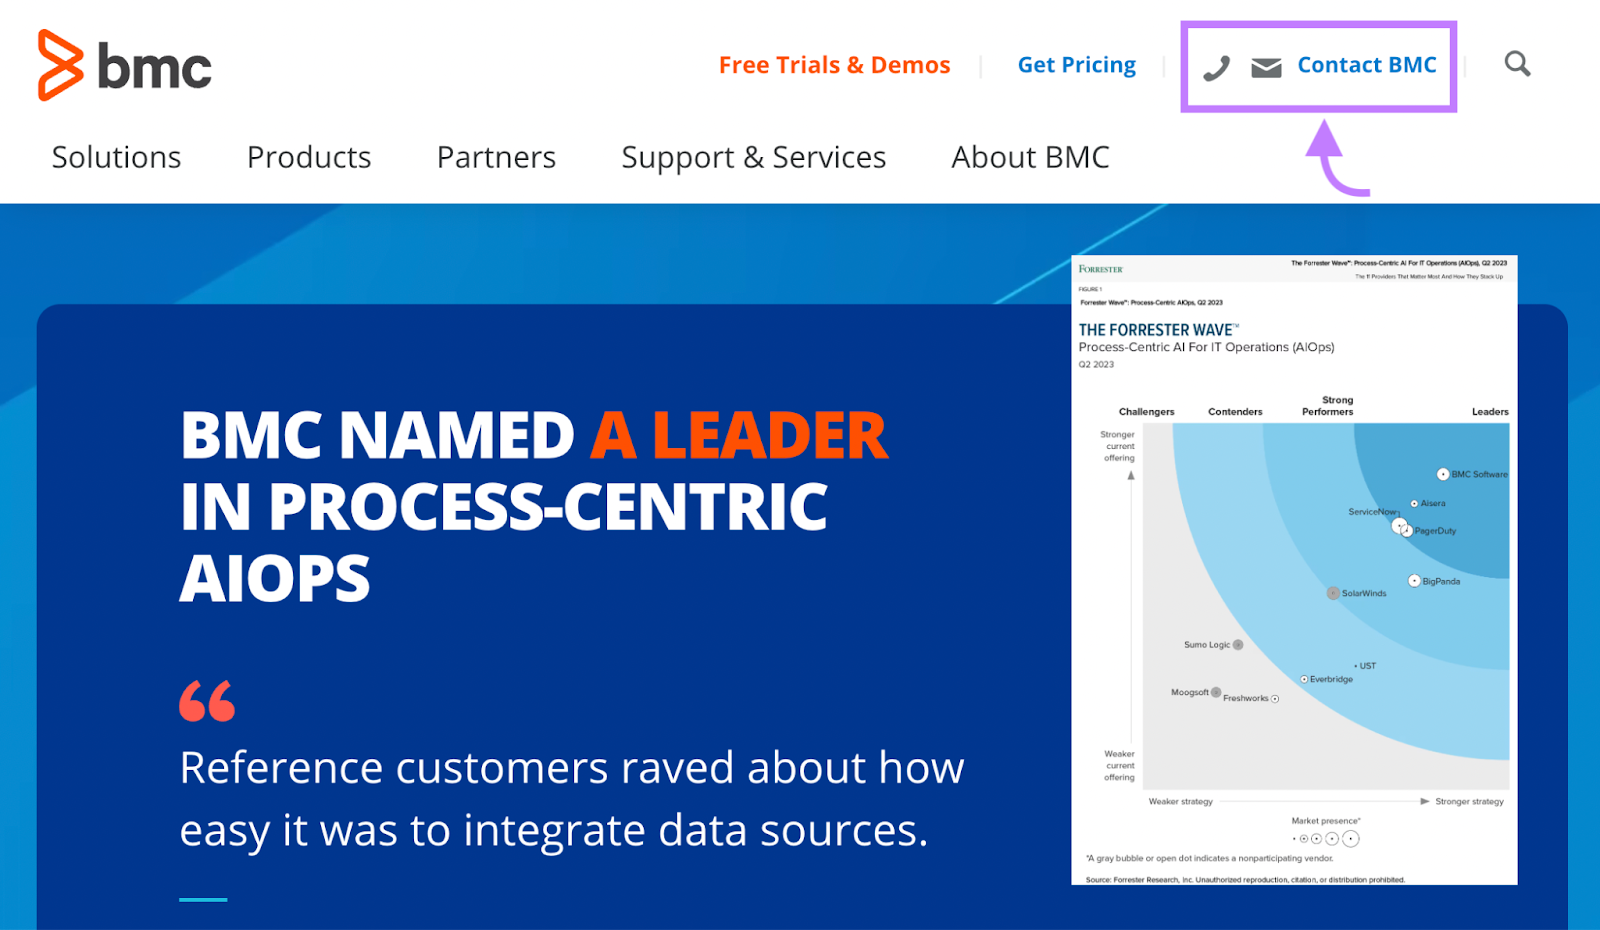 bmc homepage with “Contact BMC” button highlighted